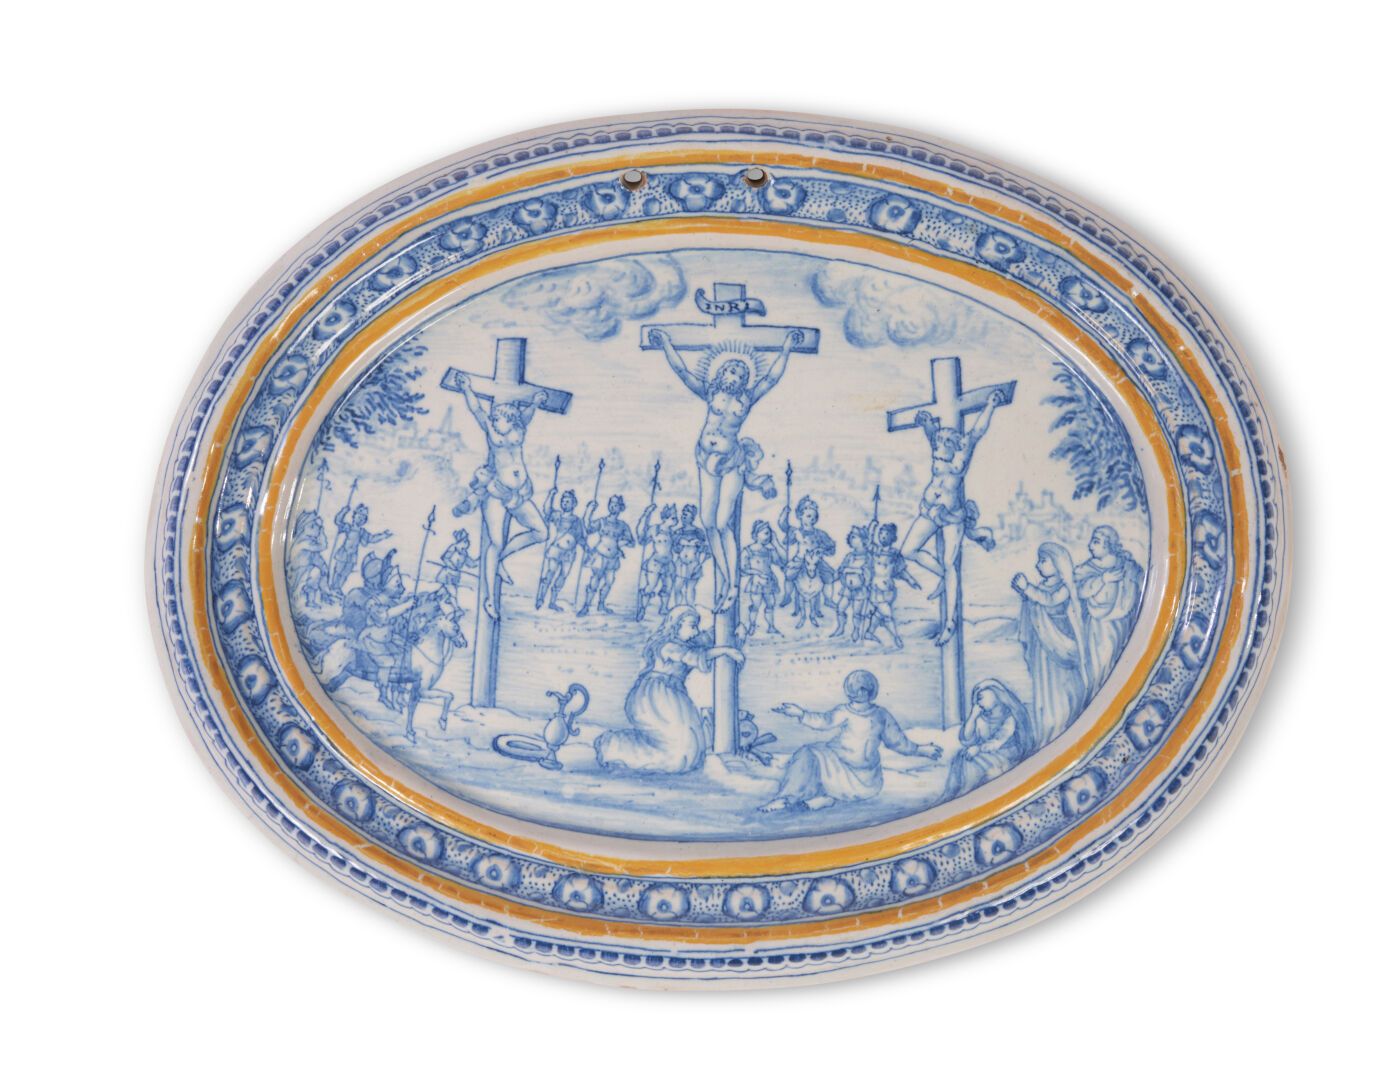 Null Montpellier
Oval earthenware plate decorated in blue monochrome in the cent&hellip;